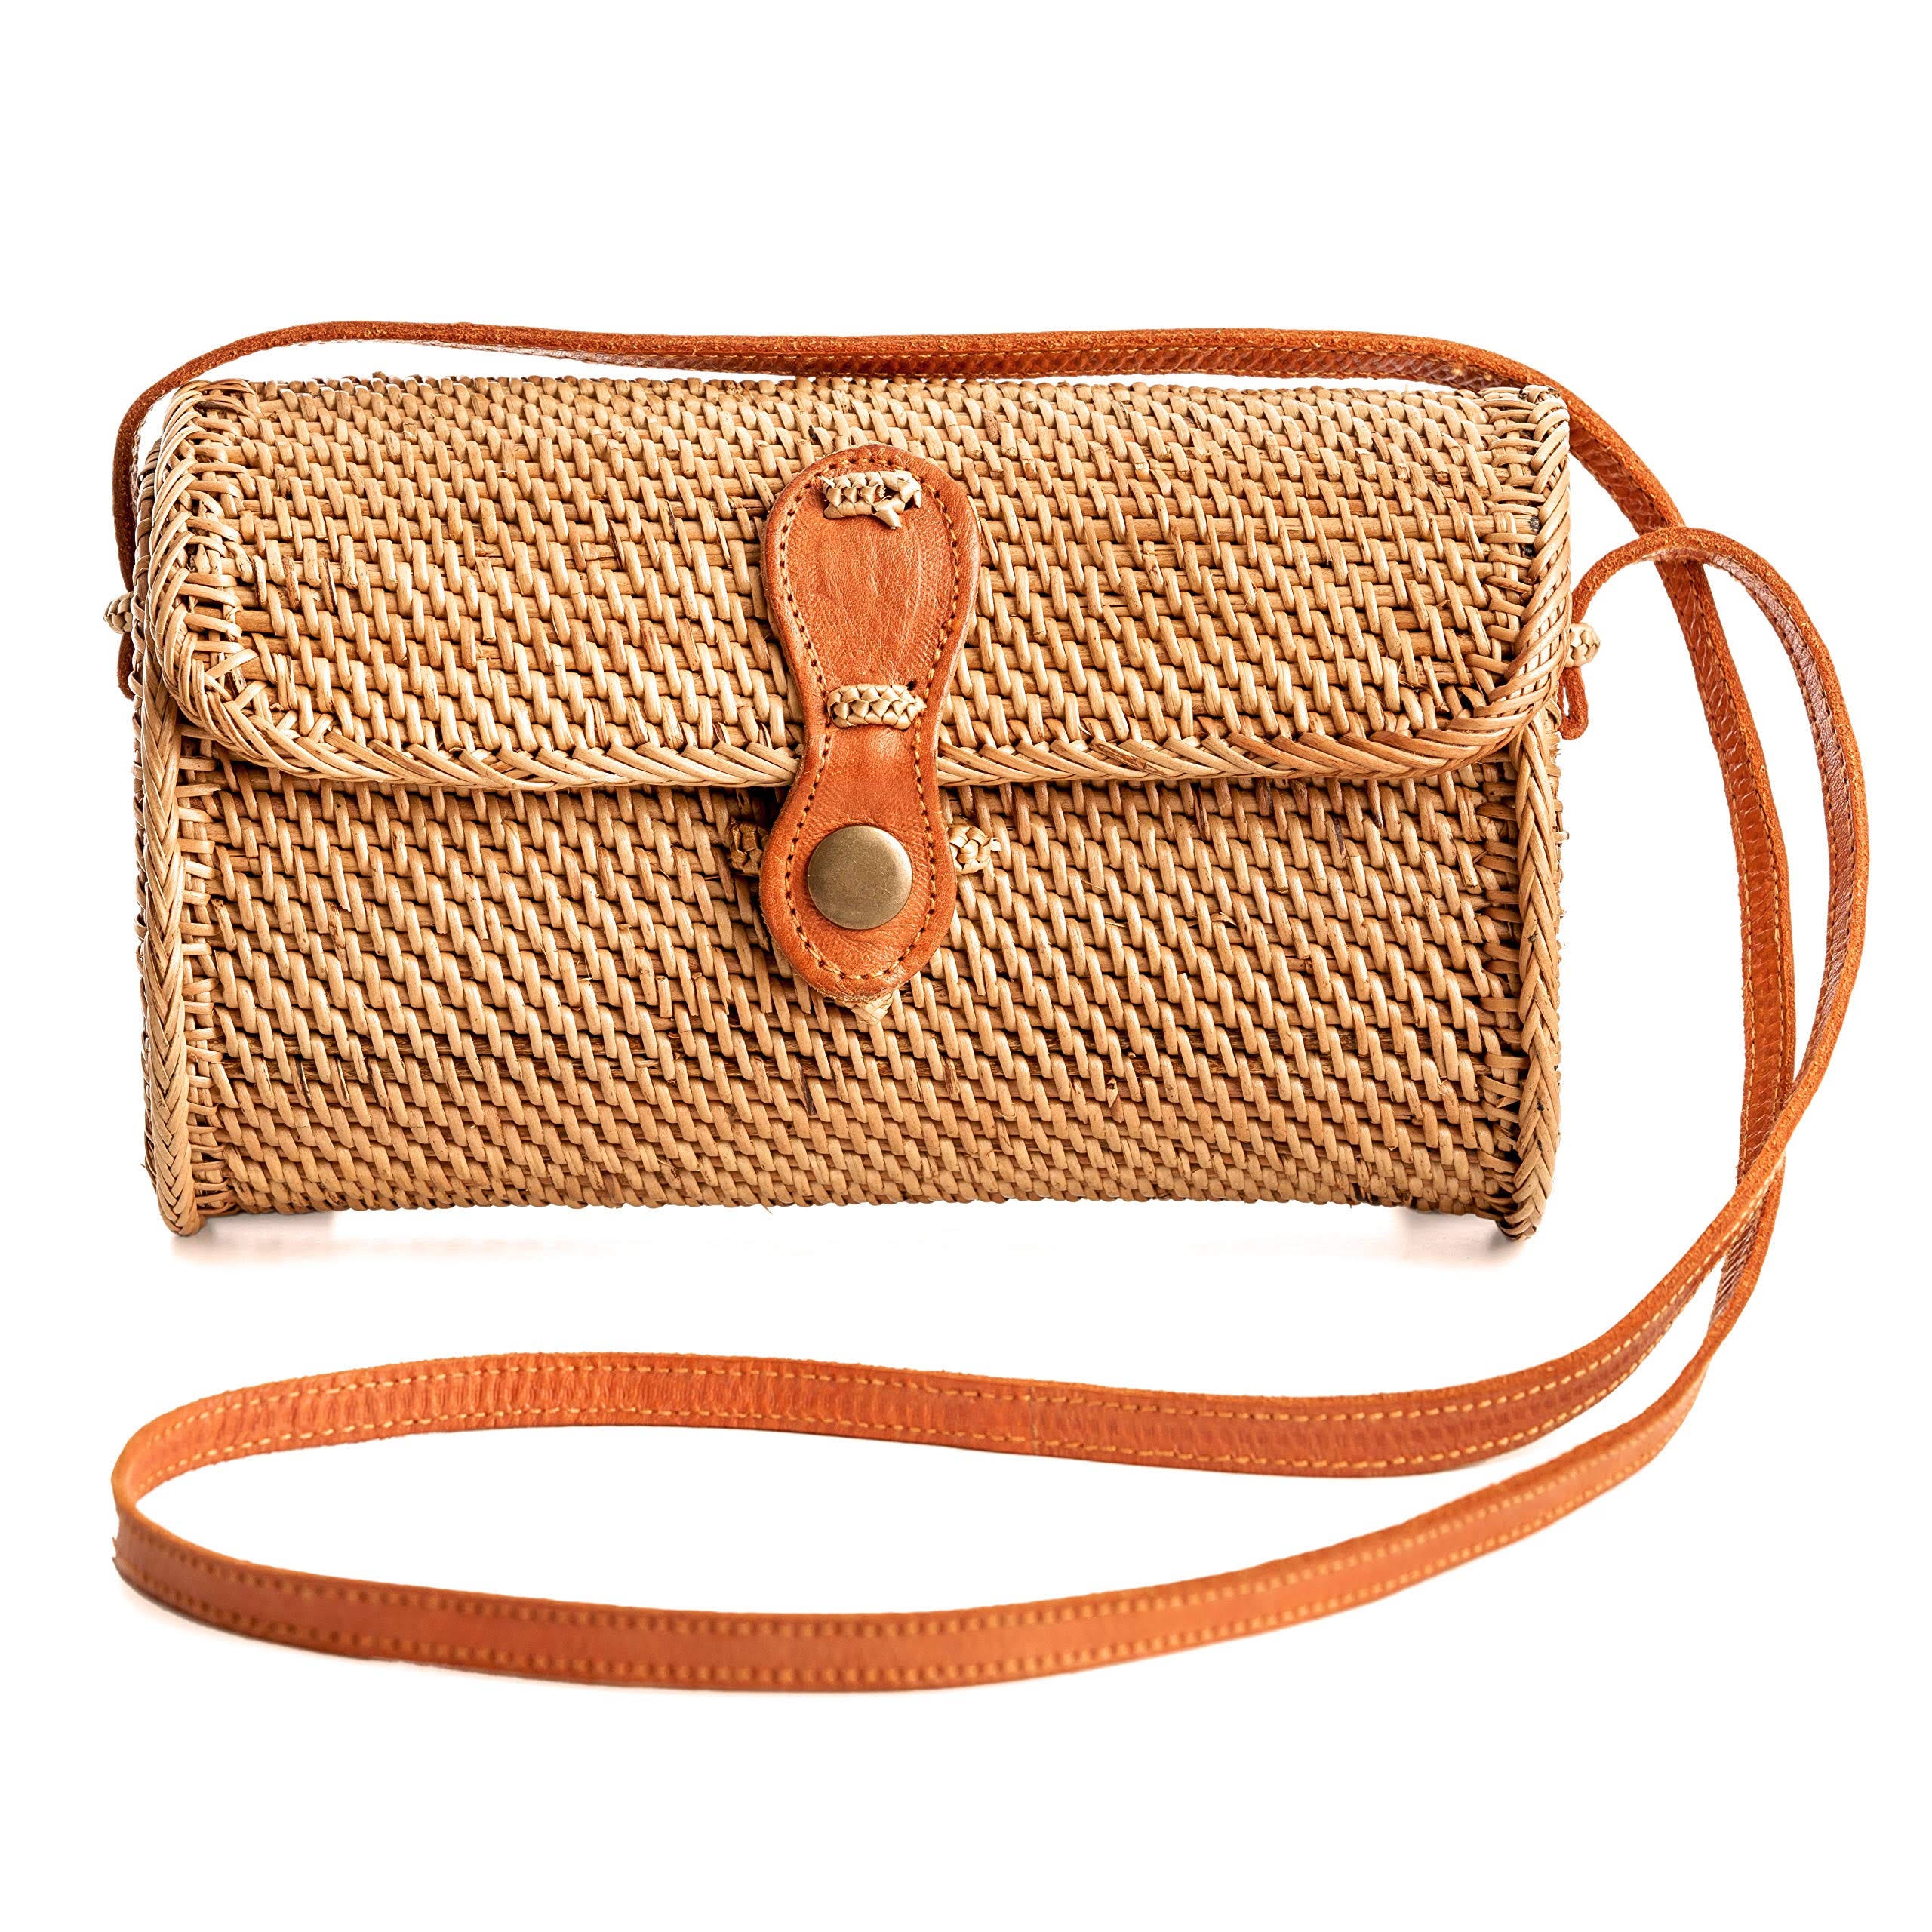 Handcrafted Bali Rattan Bags - Unique Handwoven Accessories for Style and Support | Image